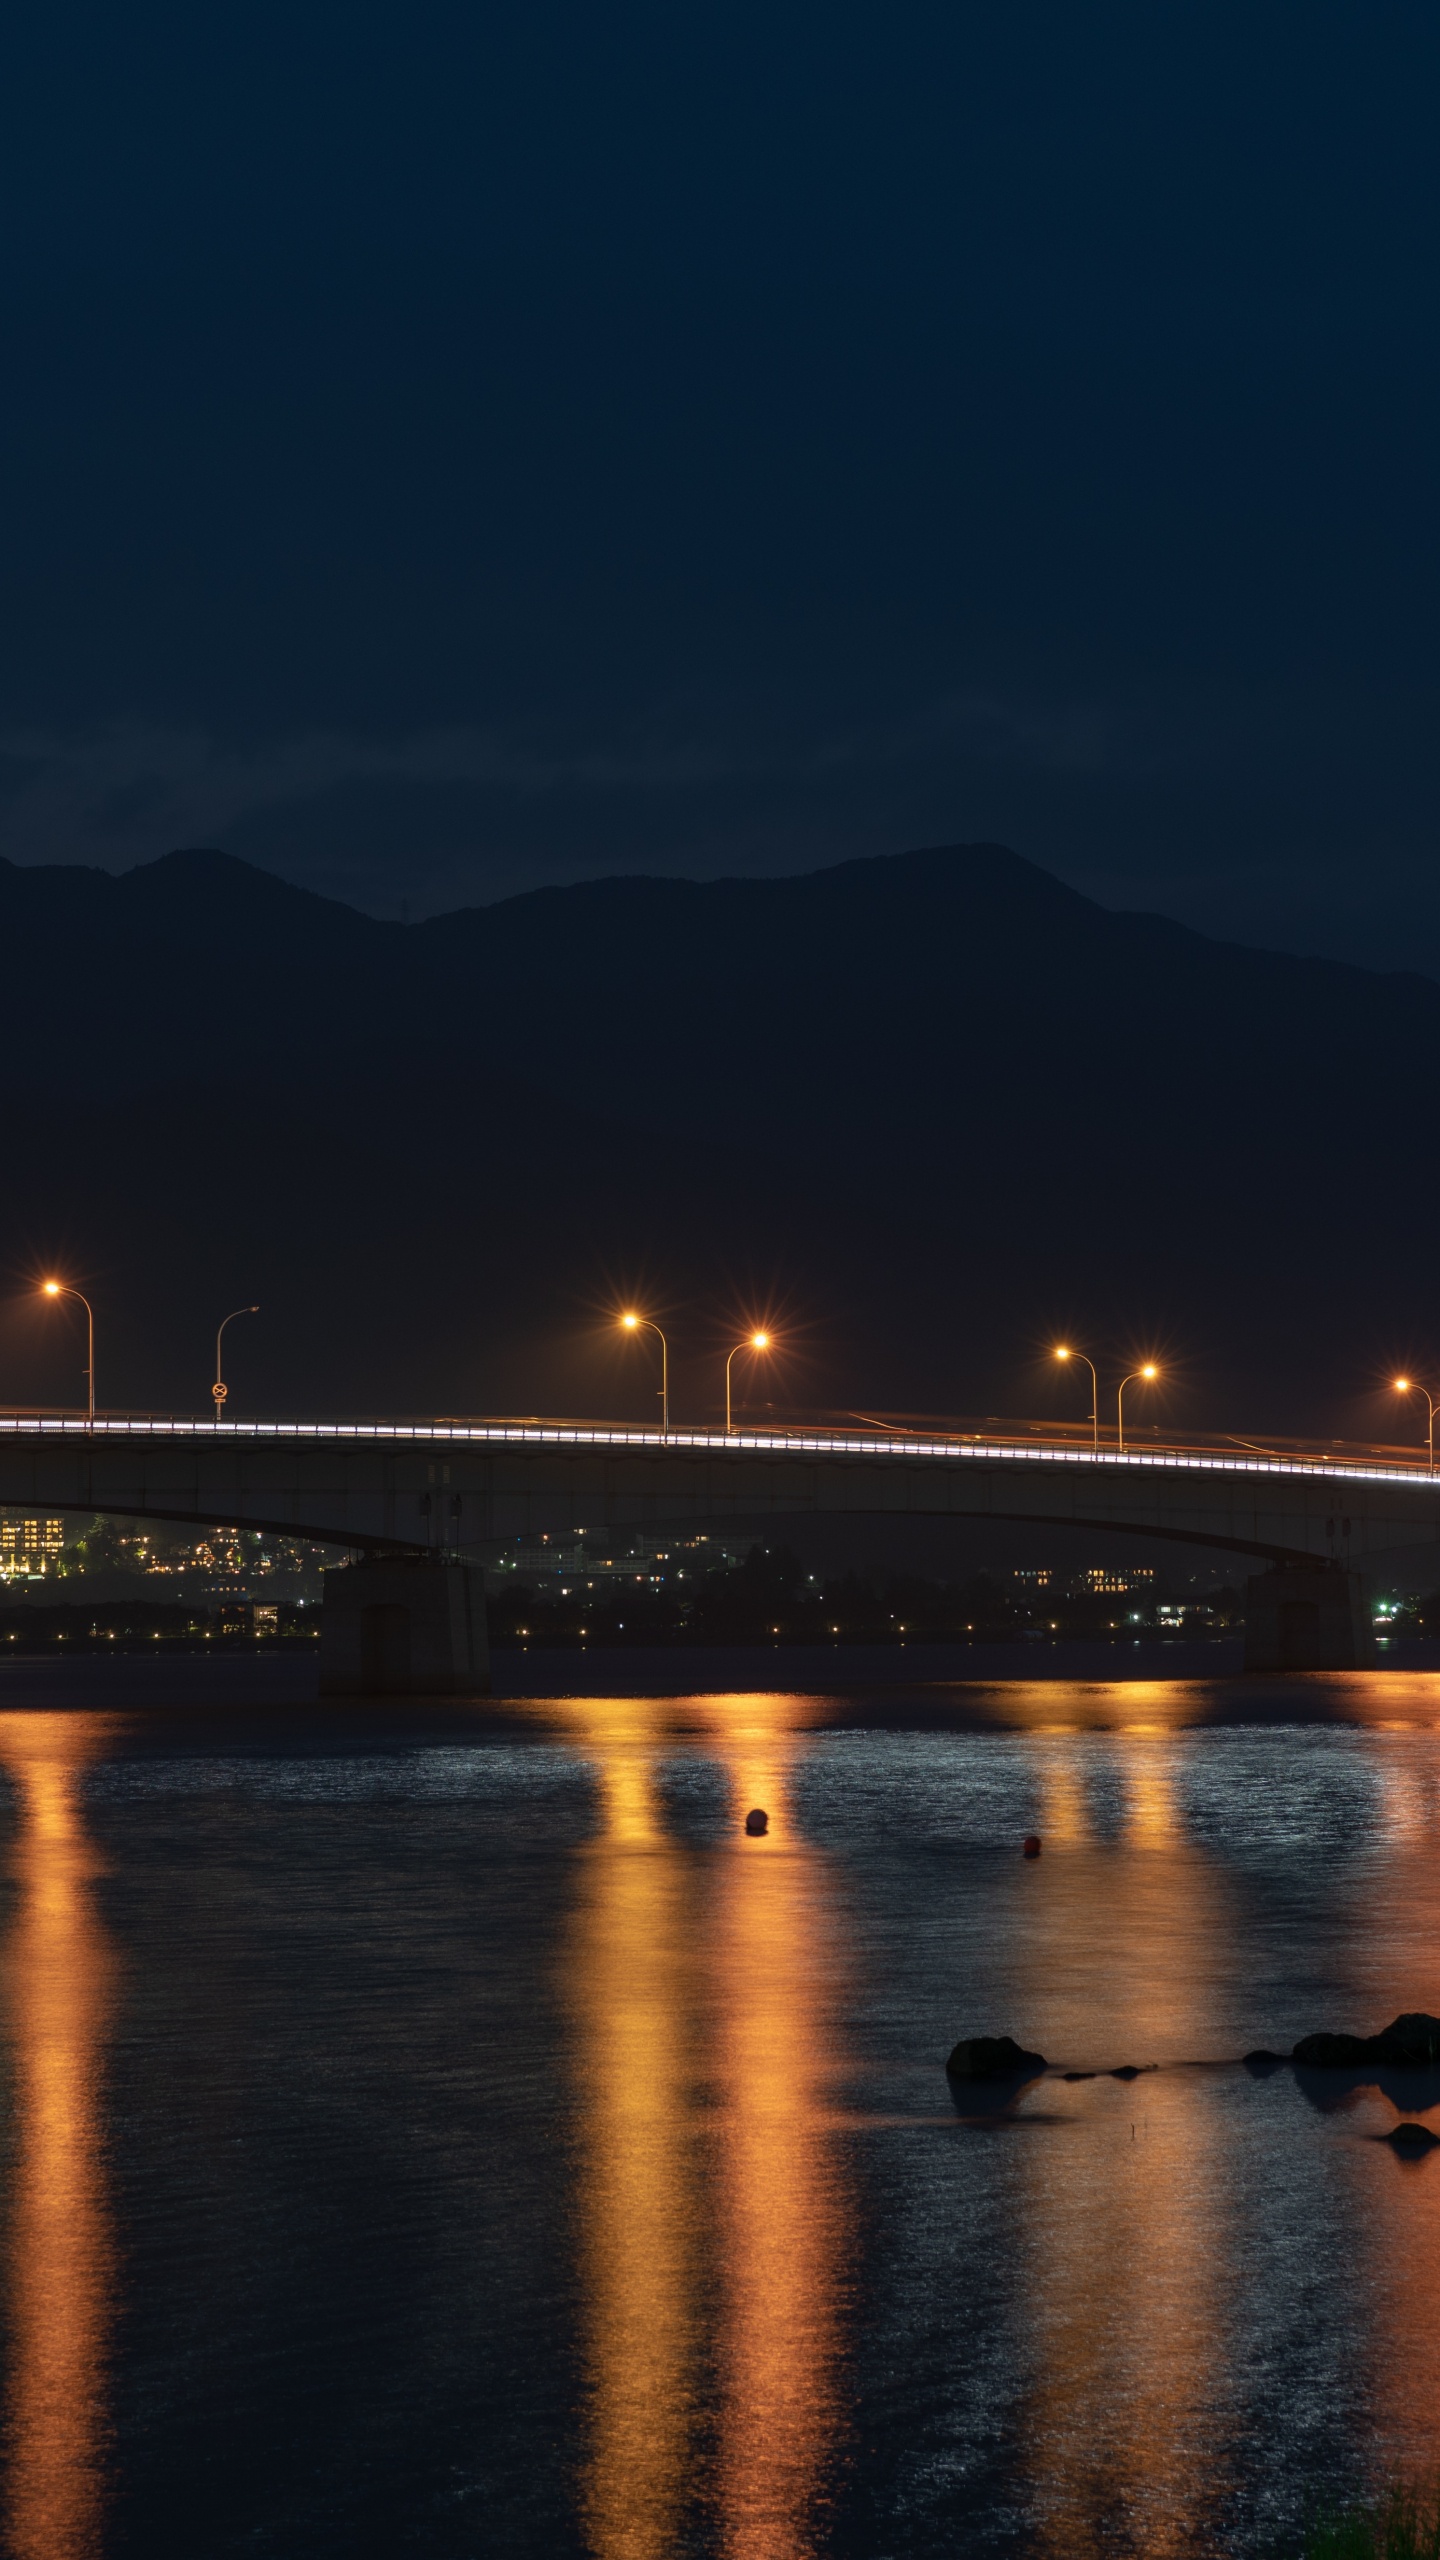 Lighted Bridge Over Water During Night Time. Wallpaper in 1440x2560 Resolution